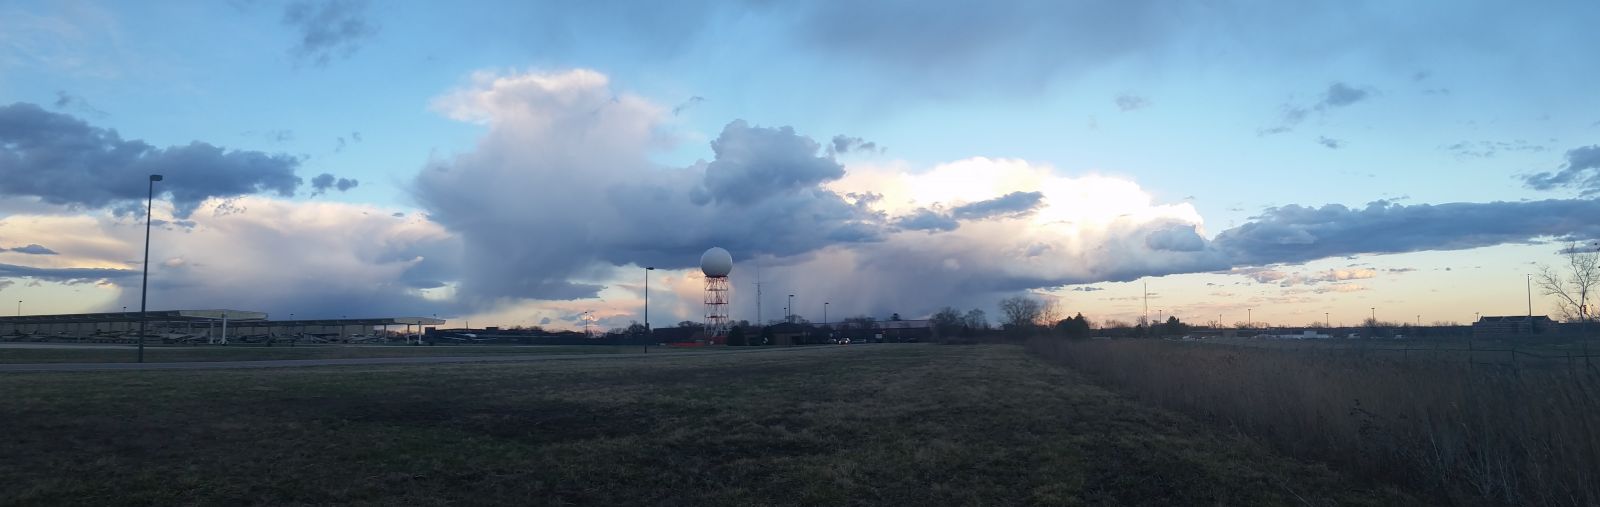 Outside of NWS Chicago office in Romeoville, IL. Courtesy of Ricky Castro.